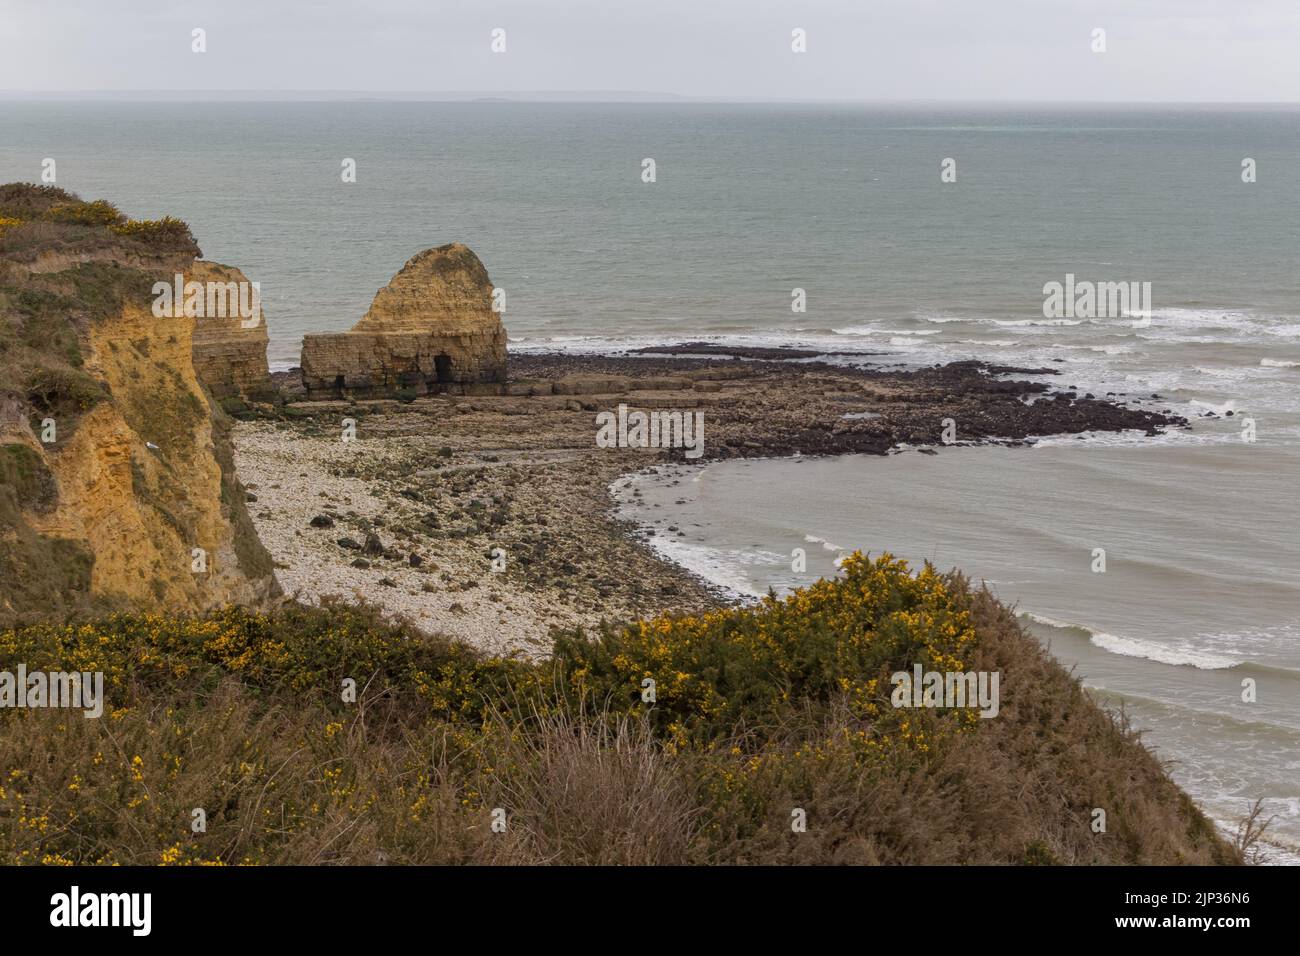 A high angle shot of the promontory of Pointe du Hoc on the rocky coast of a channel Stock Photo